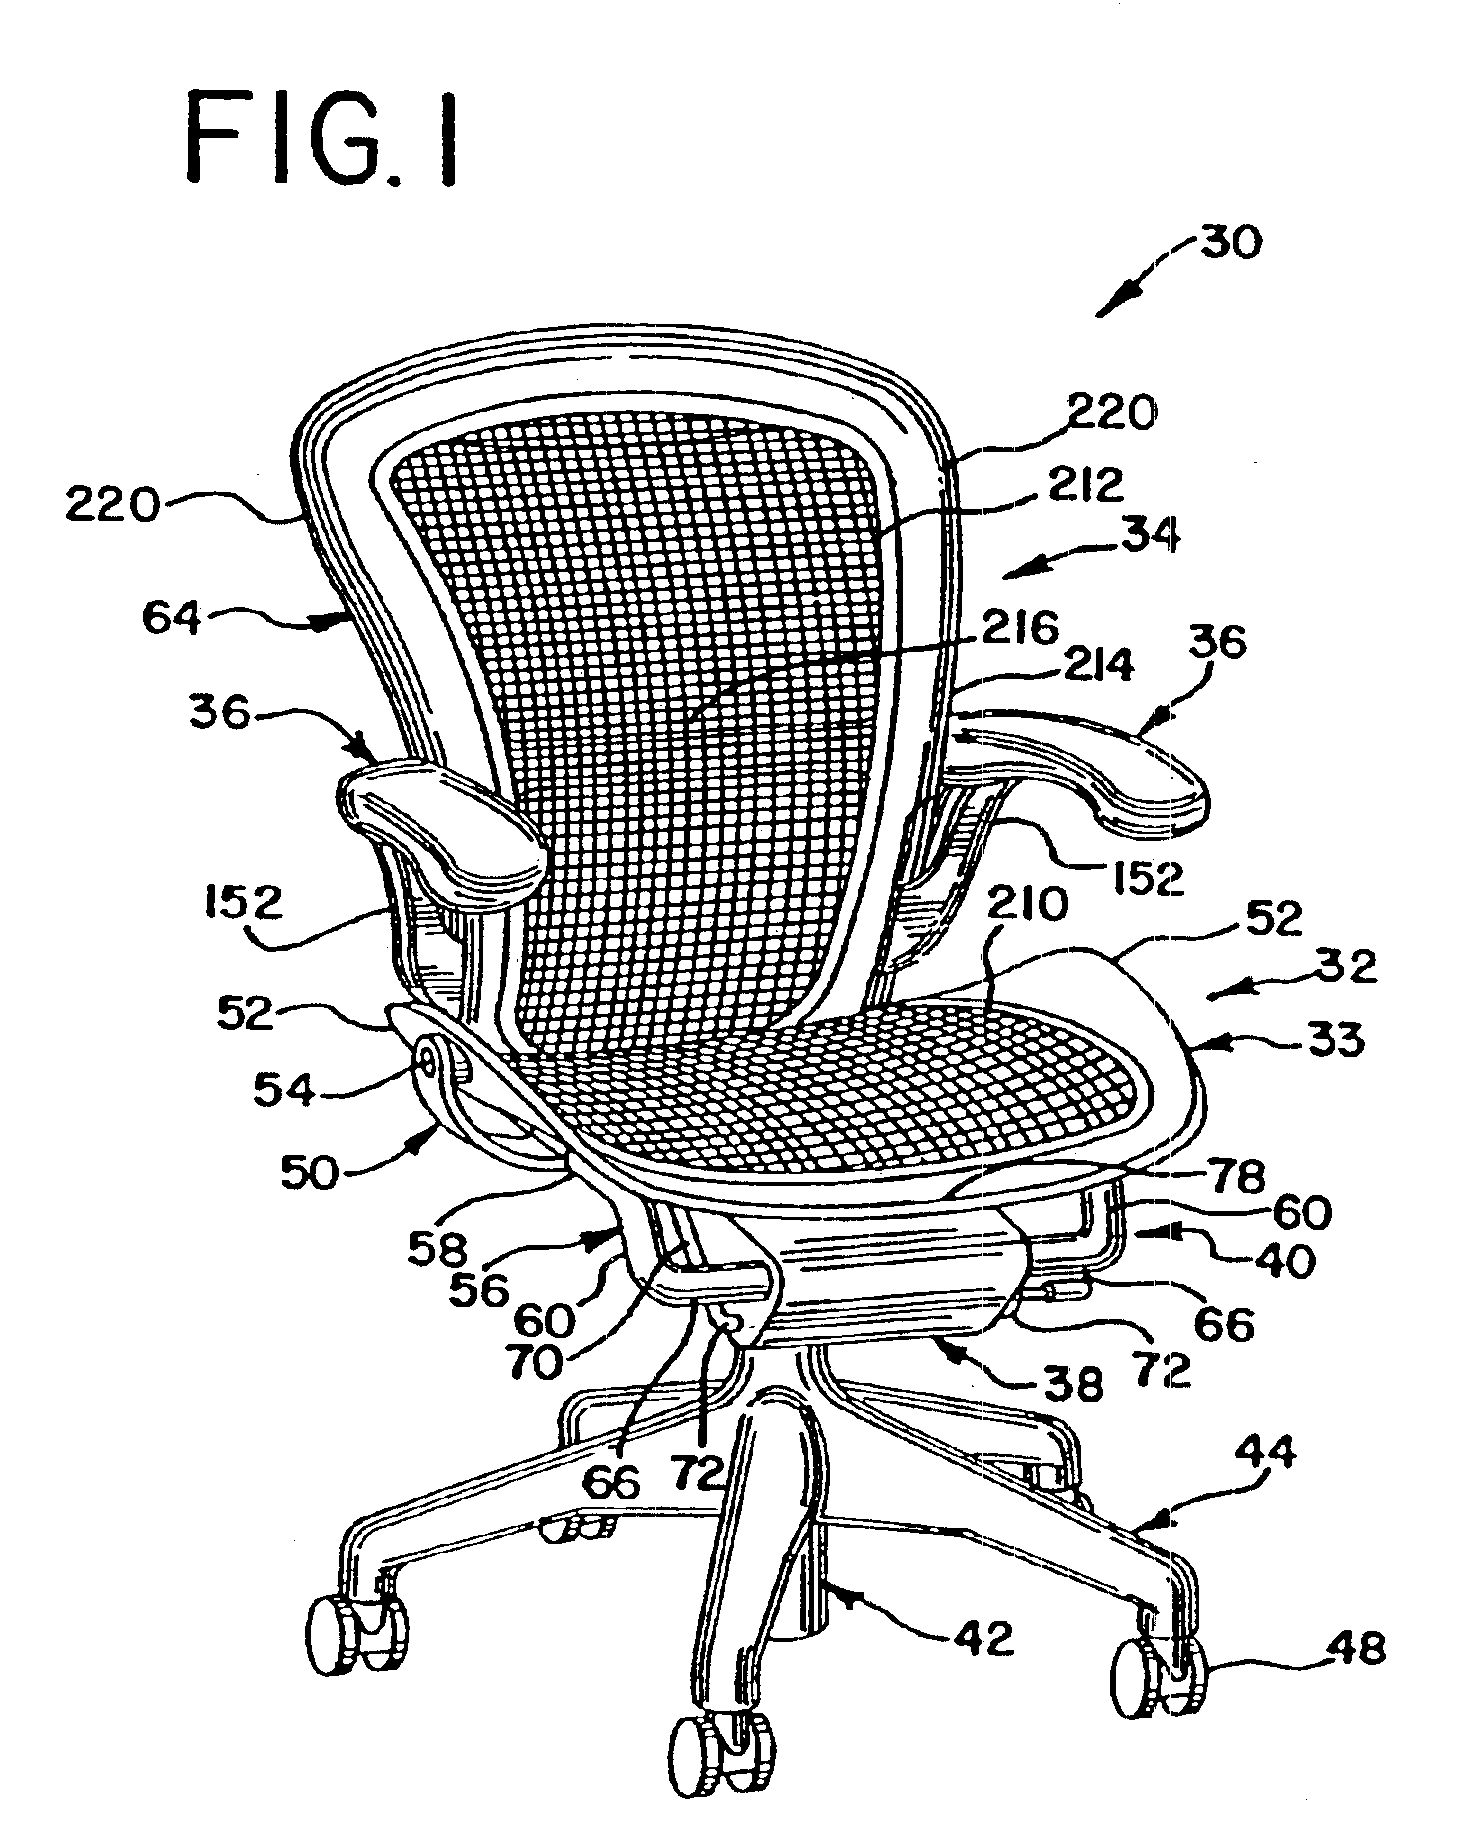 Chair with a linkage assembly